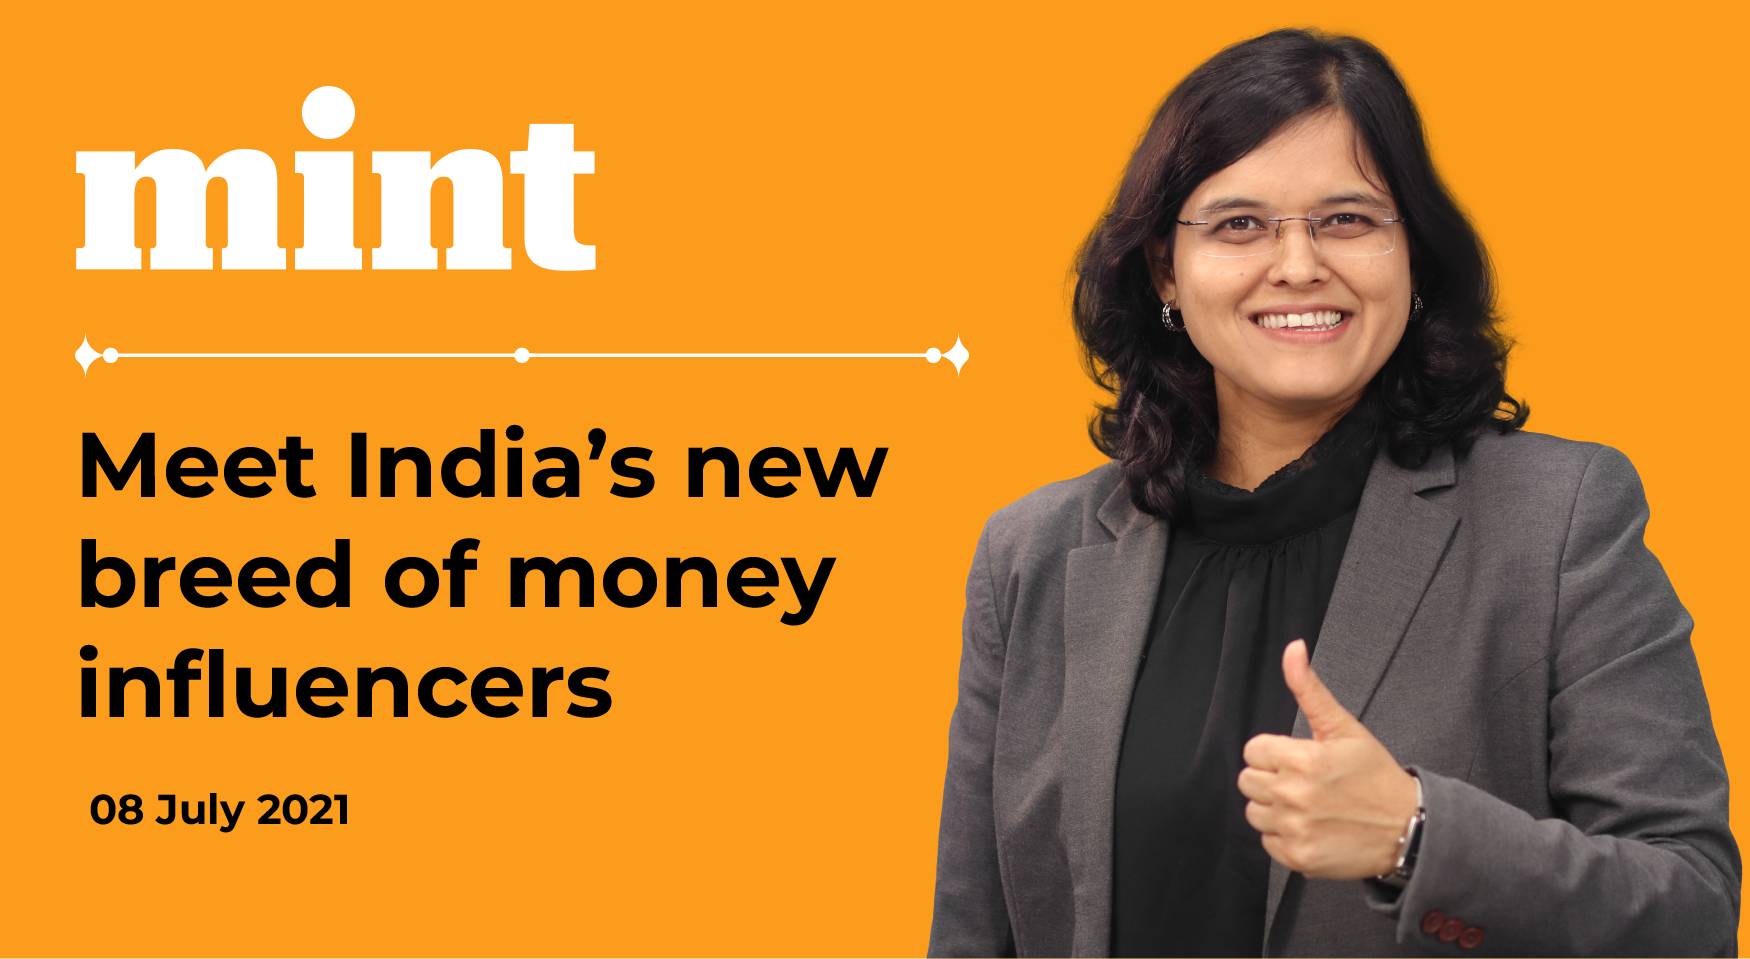 Meet India's New Breed of Money Influencers